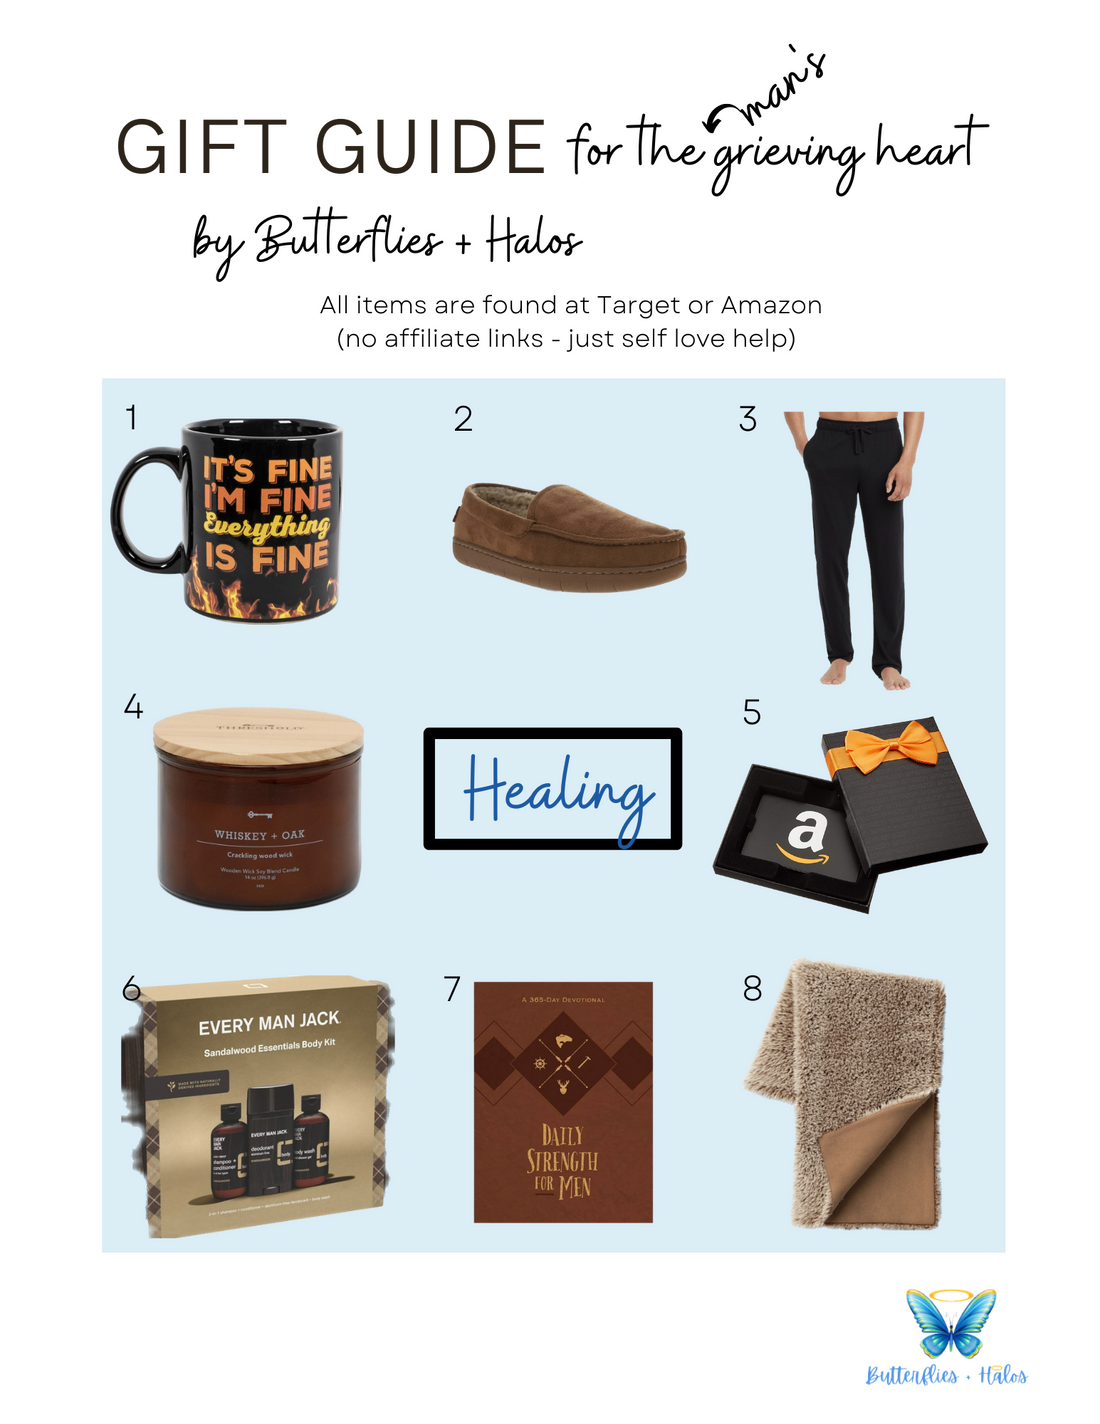 Gift guide for the "man's" grieving heart